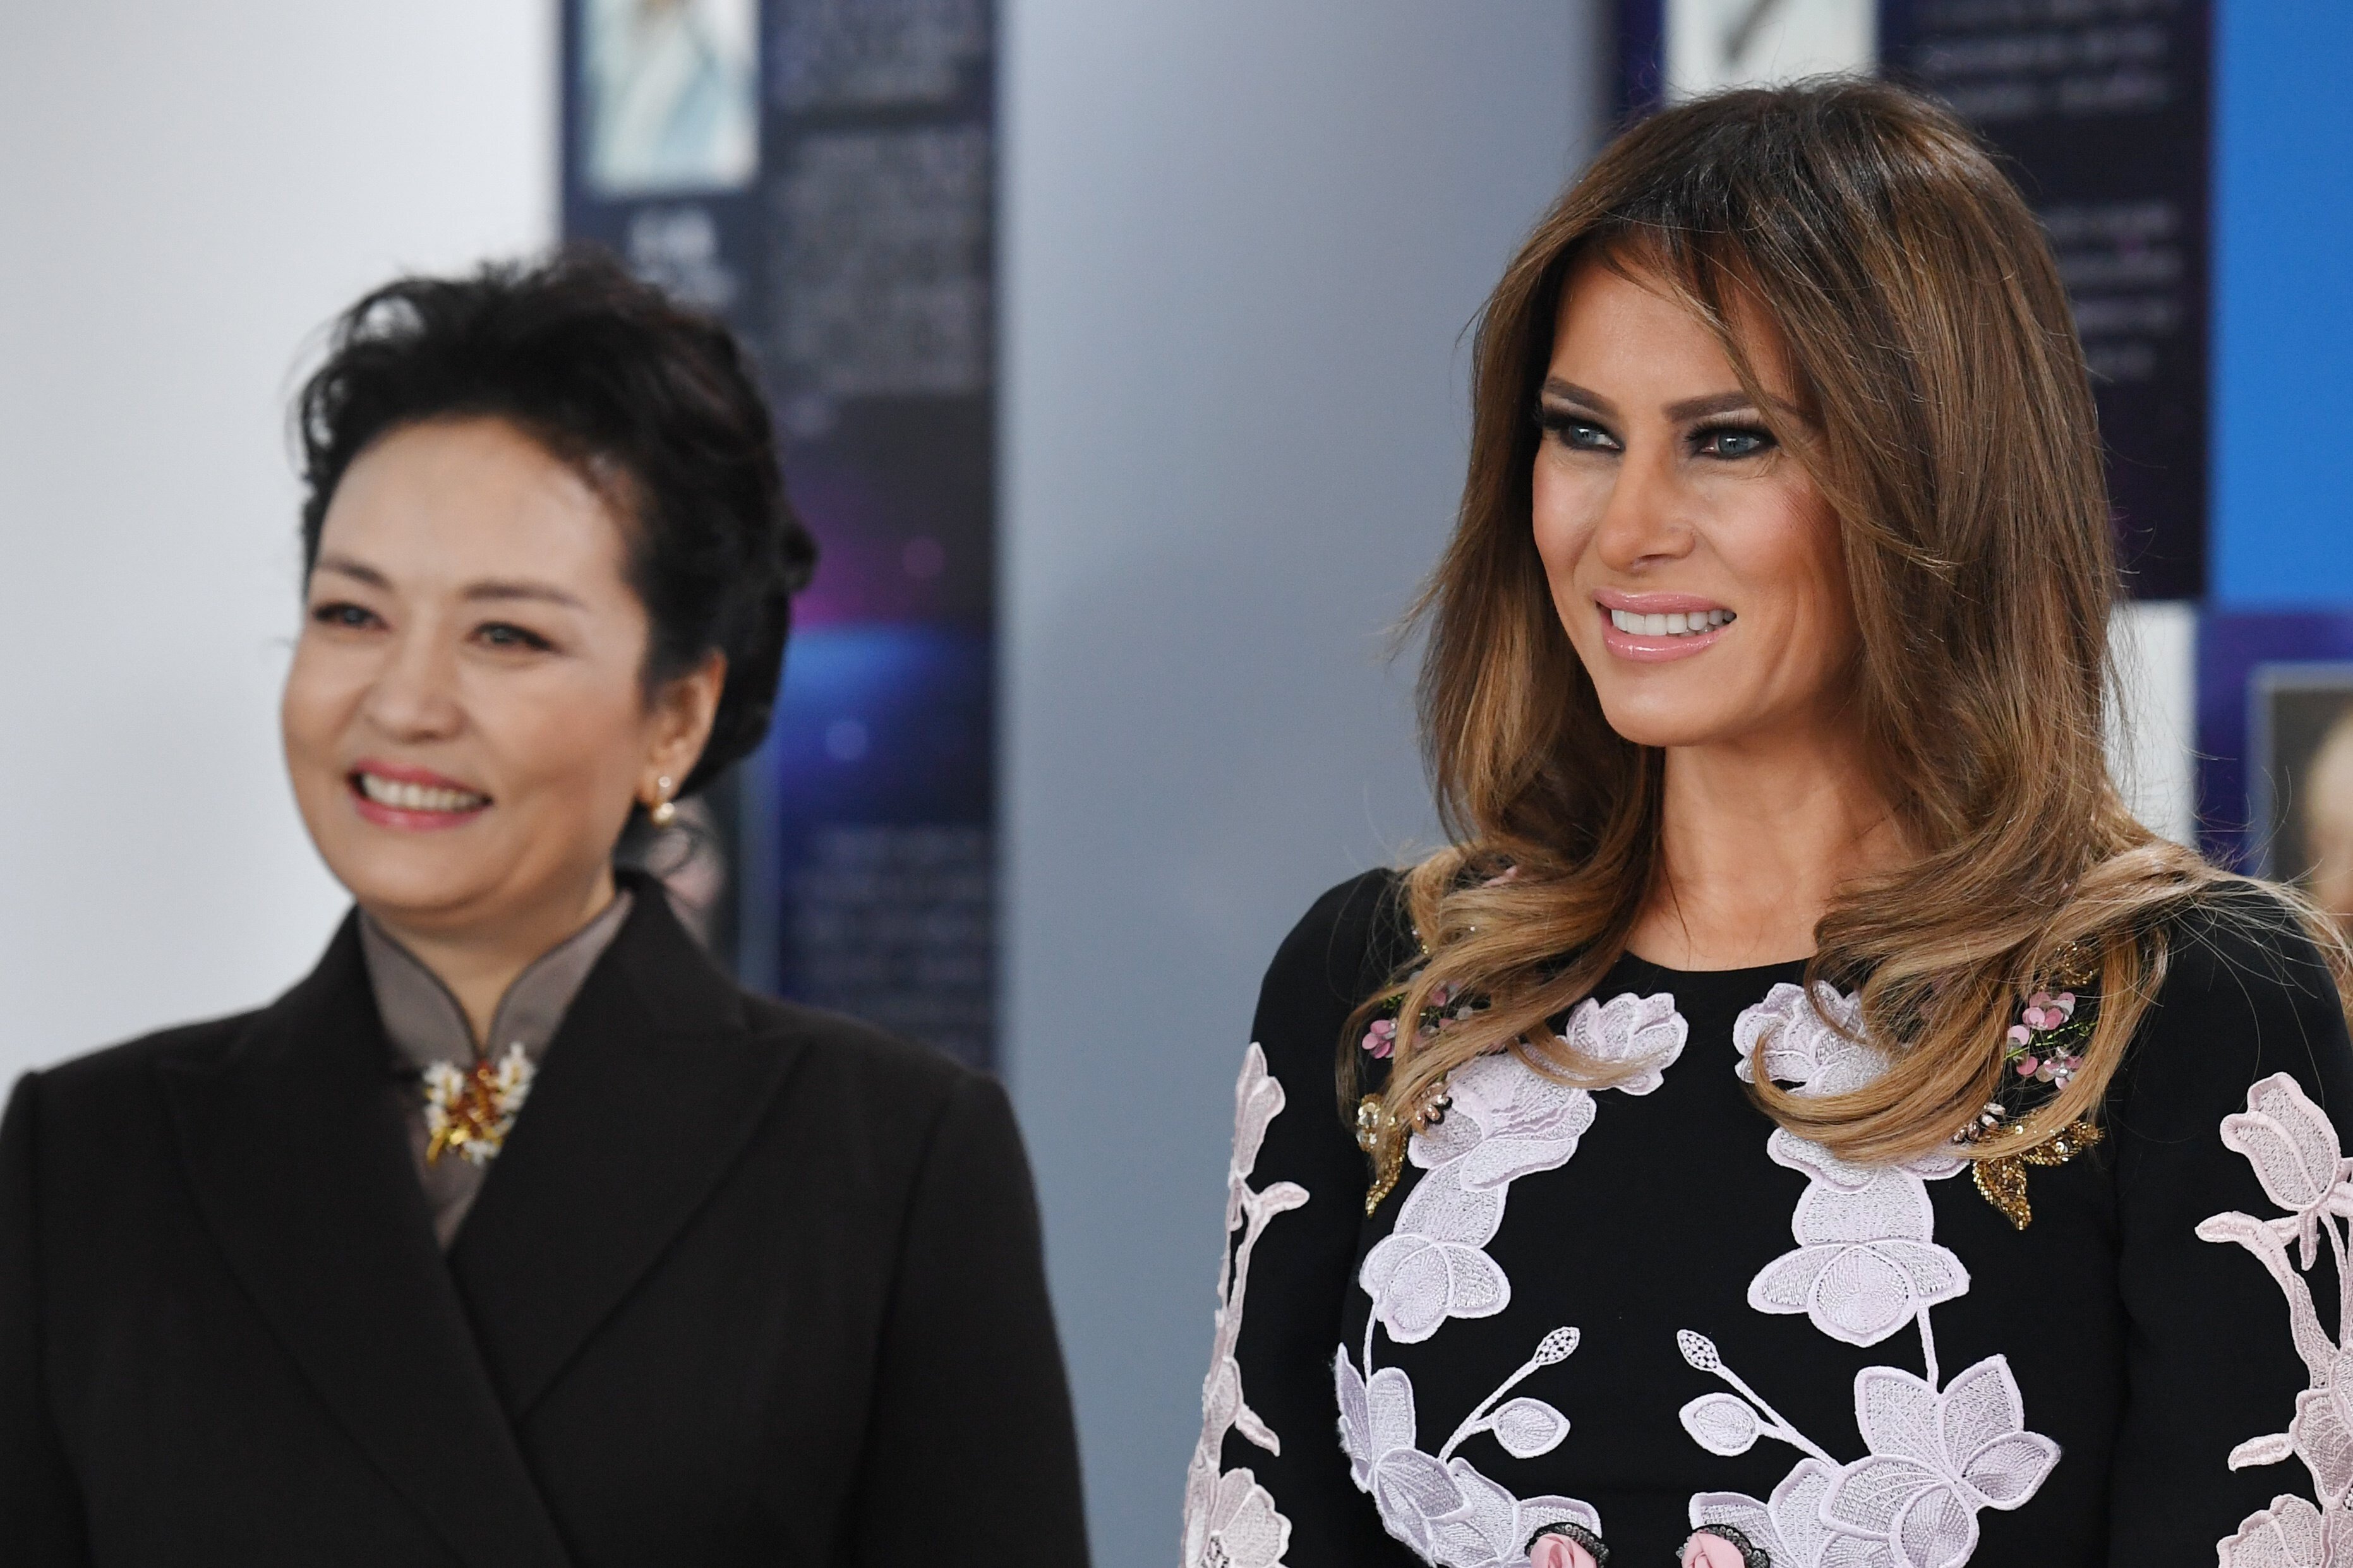 Former US first lady Melania Trump with China’s first lady Peng Liyuan, during a visit to a school in Beijing, China in November 2017 – making and receiving such visits is part of the job for a first lady and is usually accompanied by the giving of gifts. Photo: EPA-EFE